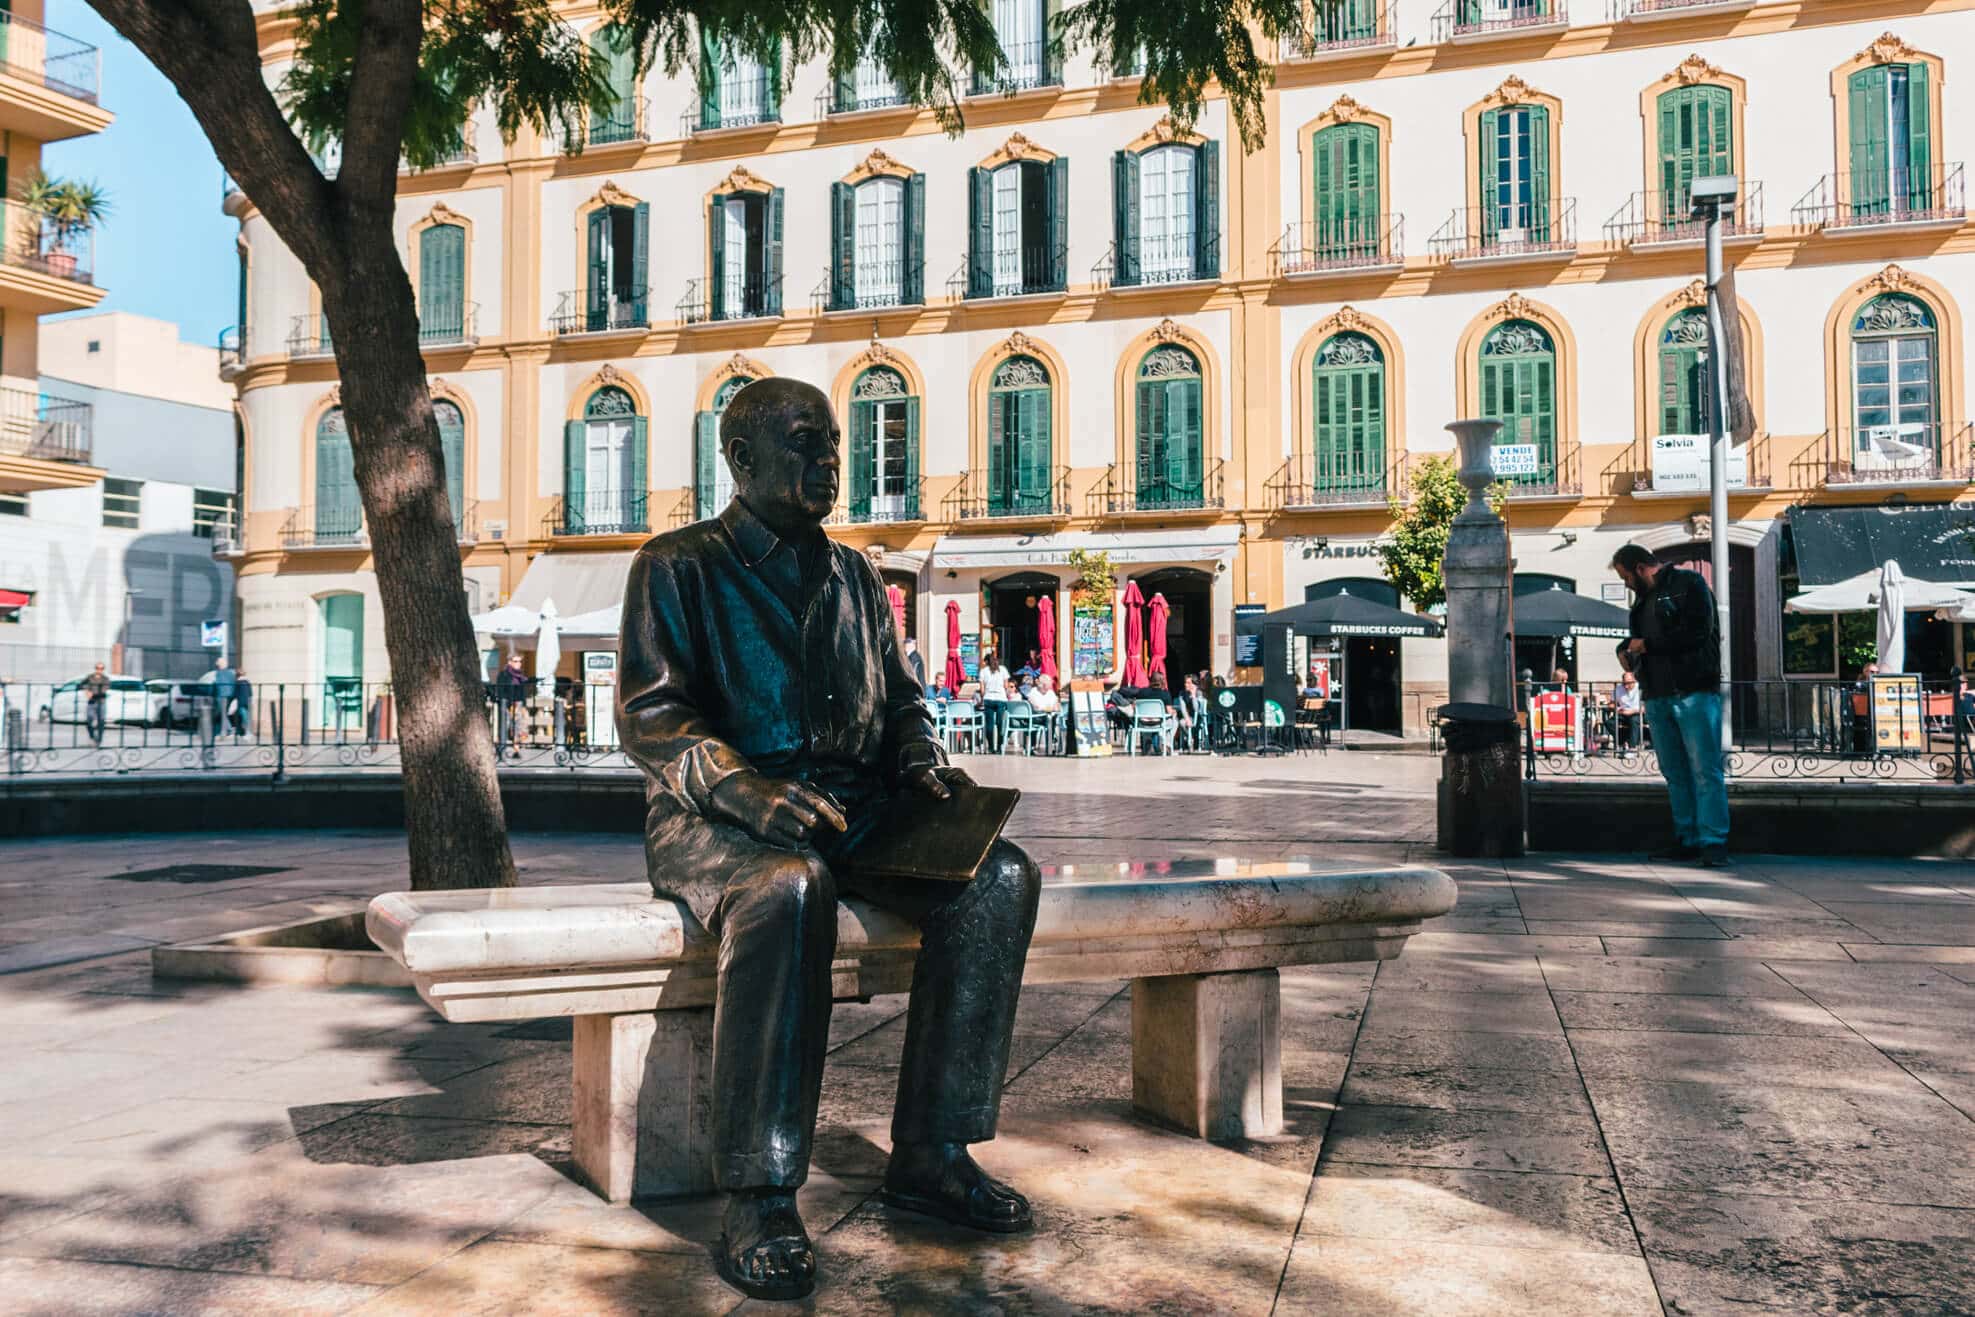 Bronze statue of Picasso sitting on a bench under a tree on a square in front of a white building with yellow trim and green windows where he was born, in Malaga's Old Town.